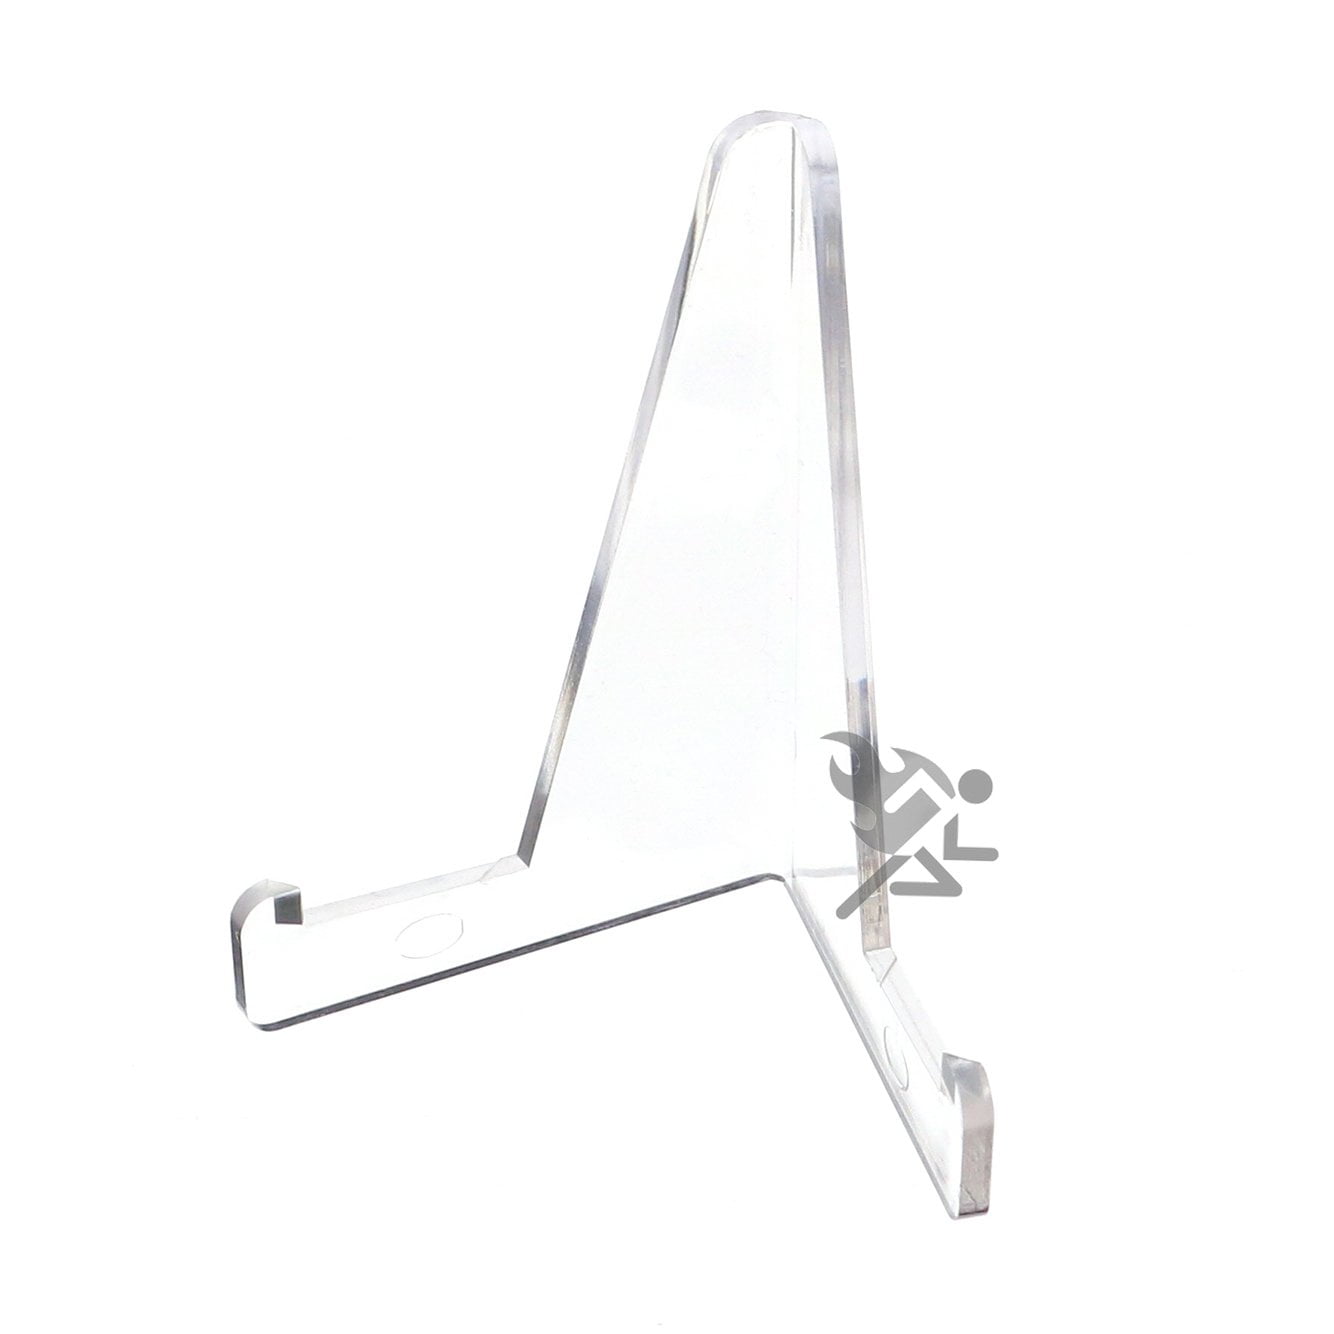 3 3-3/8" Clear Acrylic Display Stand Easels with 3/4" Shelf Qty 